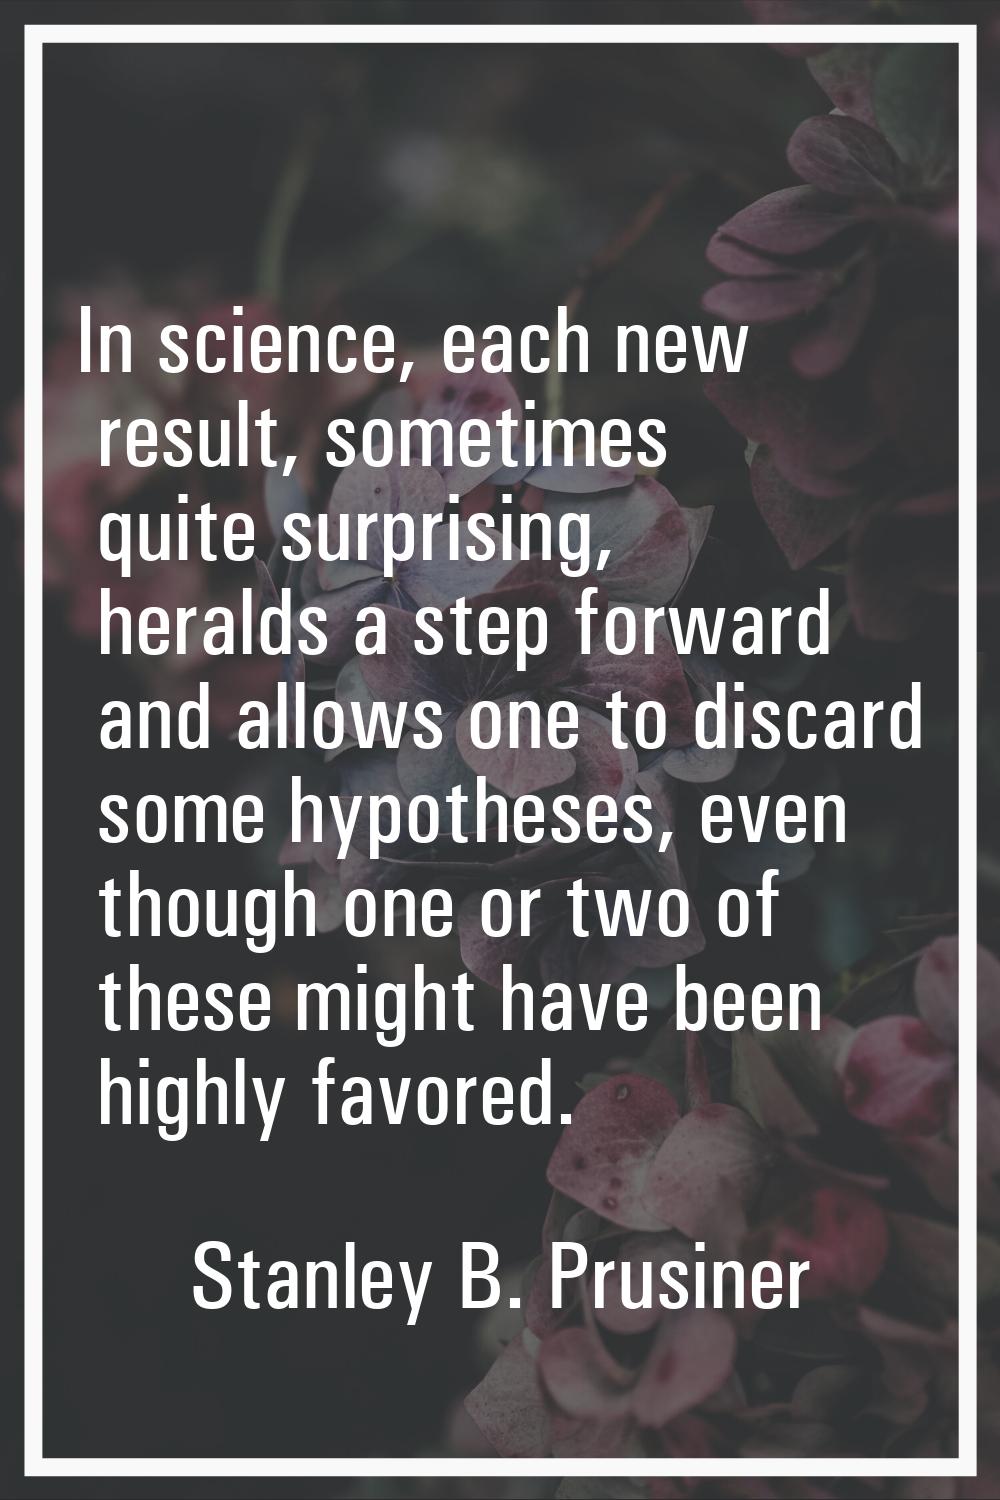 In science, each new result, sometimes quite surprising, heralds a step forward and allows one to d